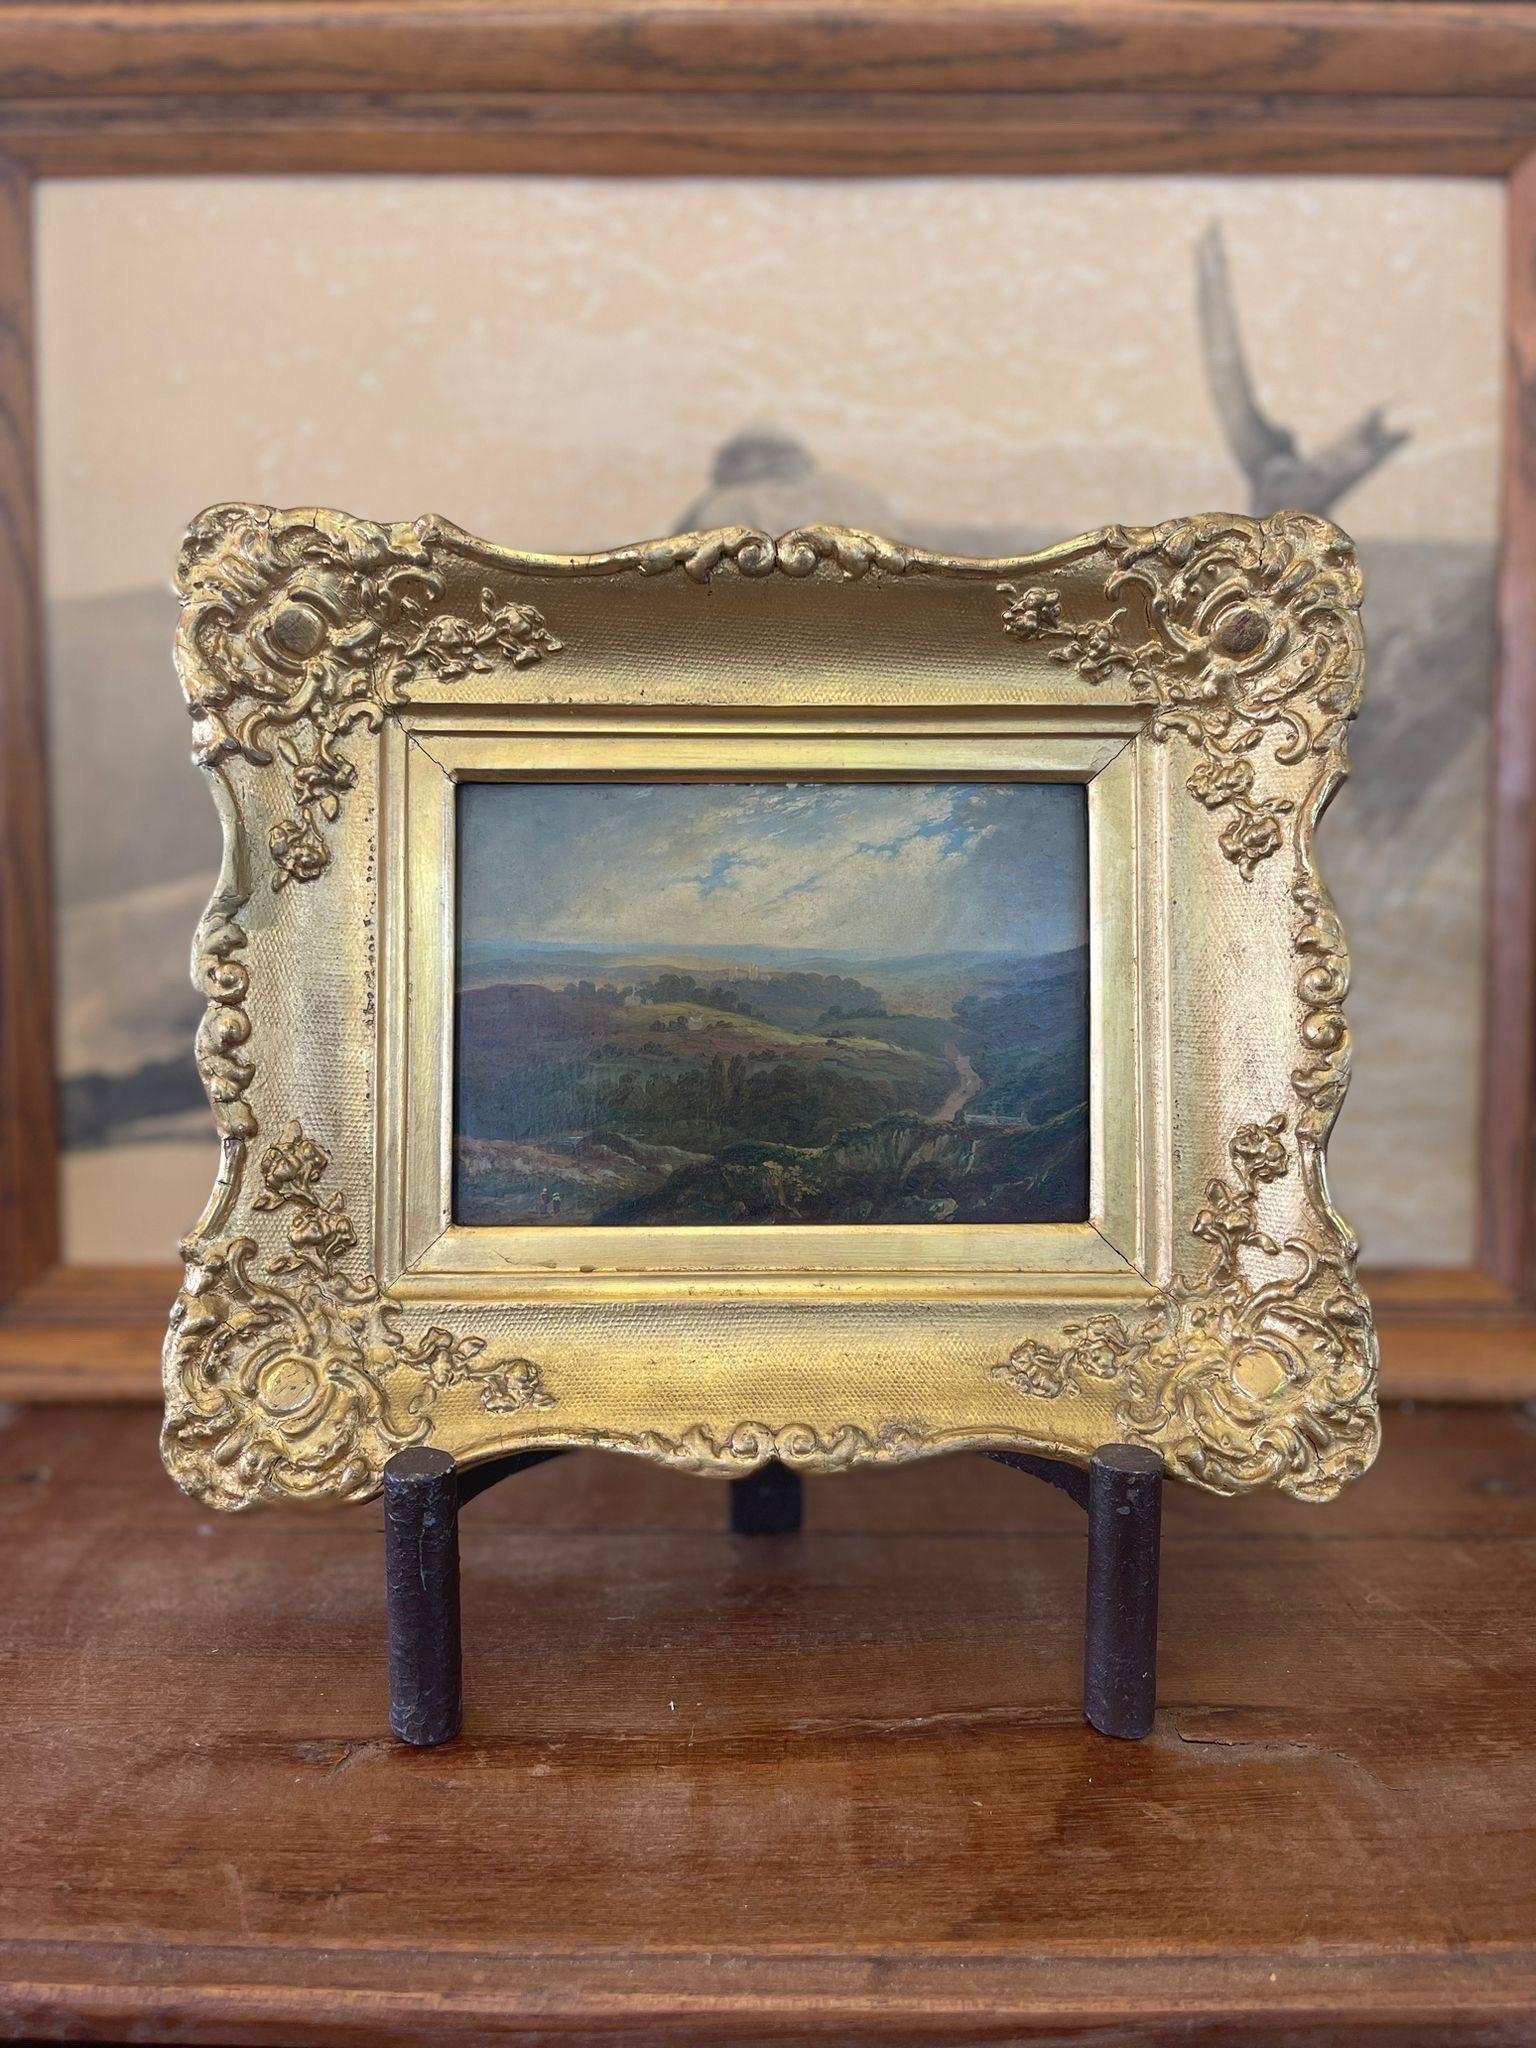 Antique Style Painting Featuring Two People walking Through a Forest Landscape. Splitting and Wear Consistent with Age. French Style Gold Colored Frame.Sticker Saying Staffordshire on Back as Pictured.

Dimensions. Painting. 7 1/2 W ; 5 1/2 H
